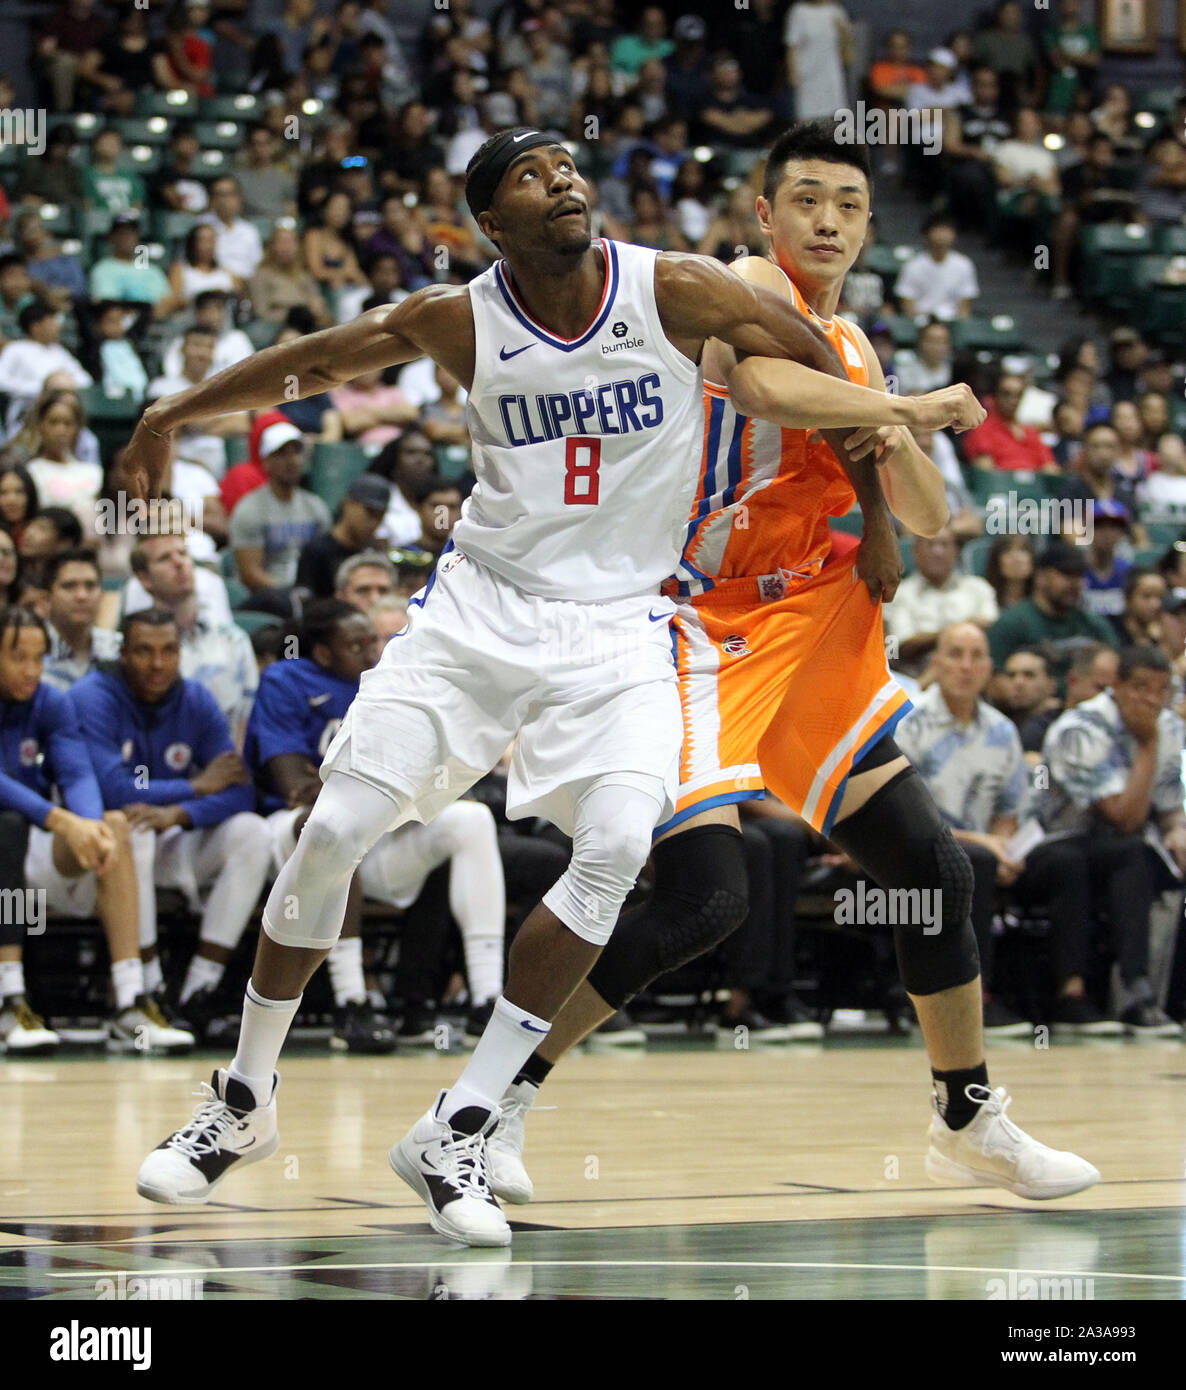 Honolulu, Hawaii. October 6, 2019 - Los Angeles Clippers forward Maurice Harkless #8 boxes out Shanghai Sharks forward Ju Mingxin #24 during a preseason game between the Los Angeles Clippers and the Shanghai Sharks at the Stan Sheriff Center on the campus of the University of Hawaii at Manoa in Honolulu, HI - Michael Sullivan/CSM. Stock Photo